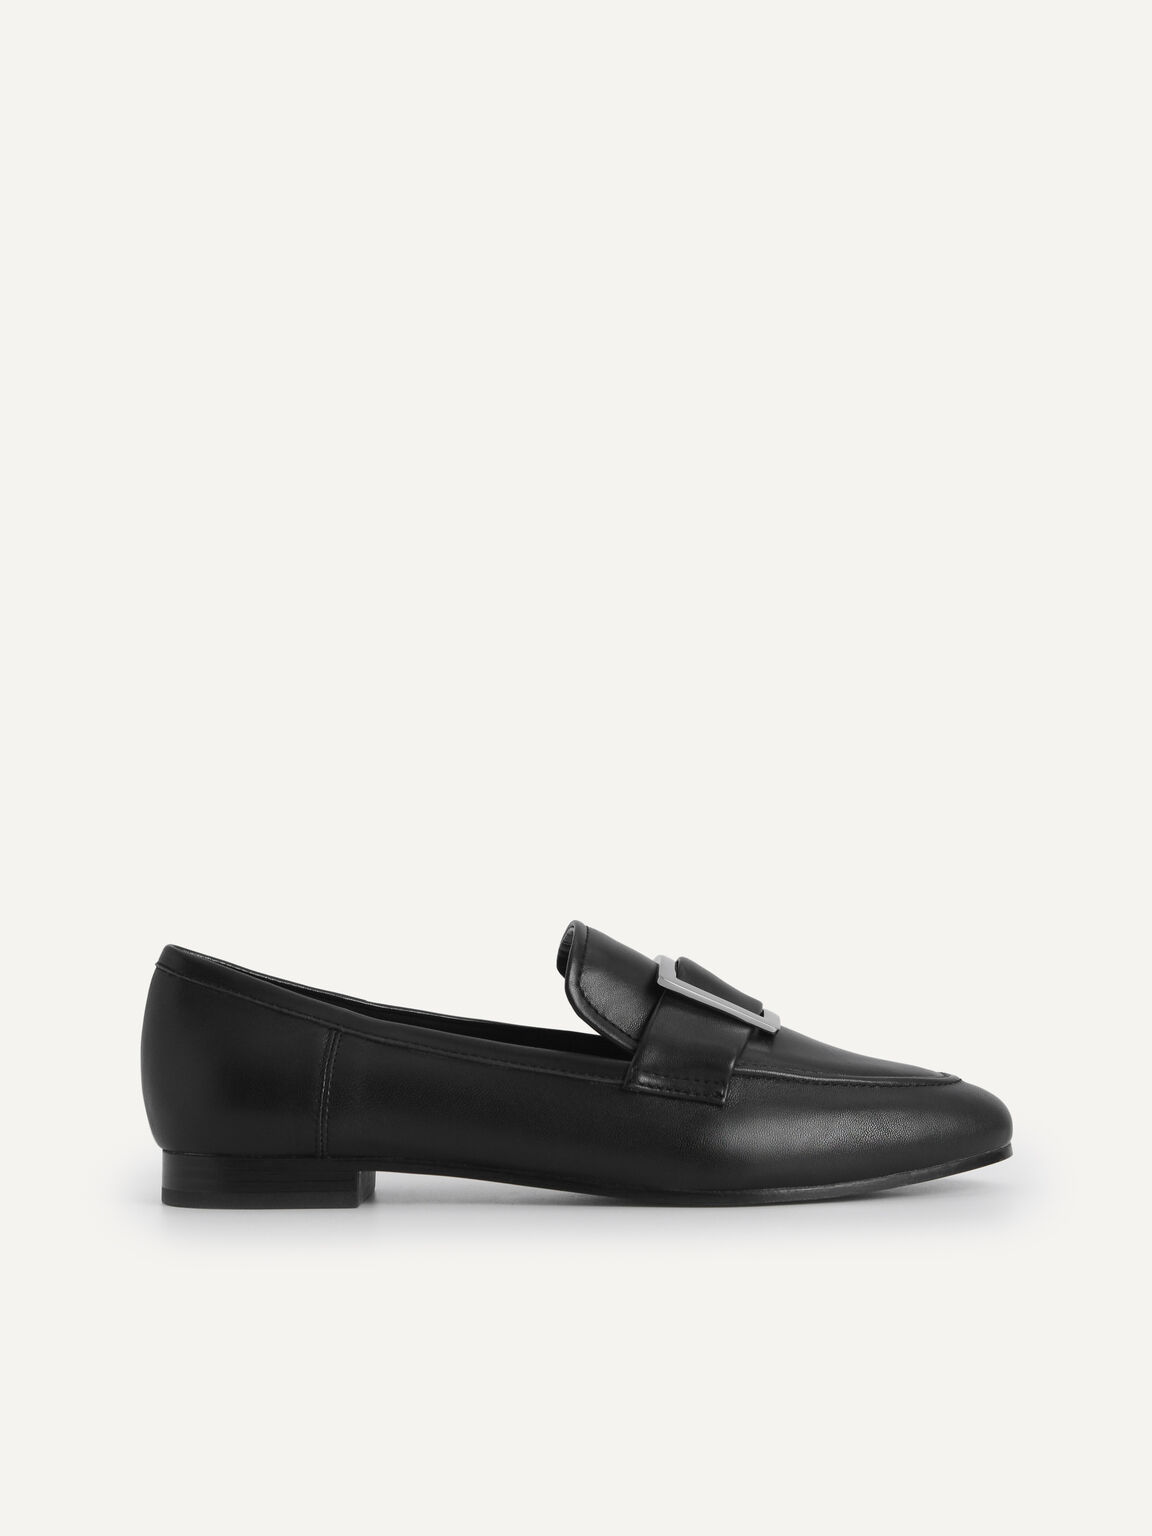 Leather Buckle Loafers, Black